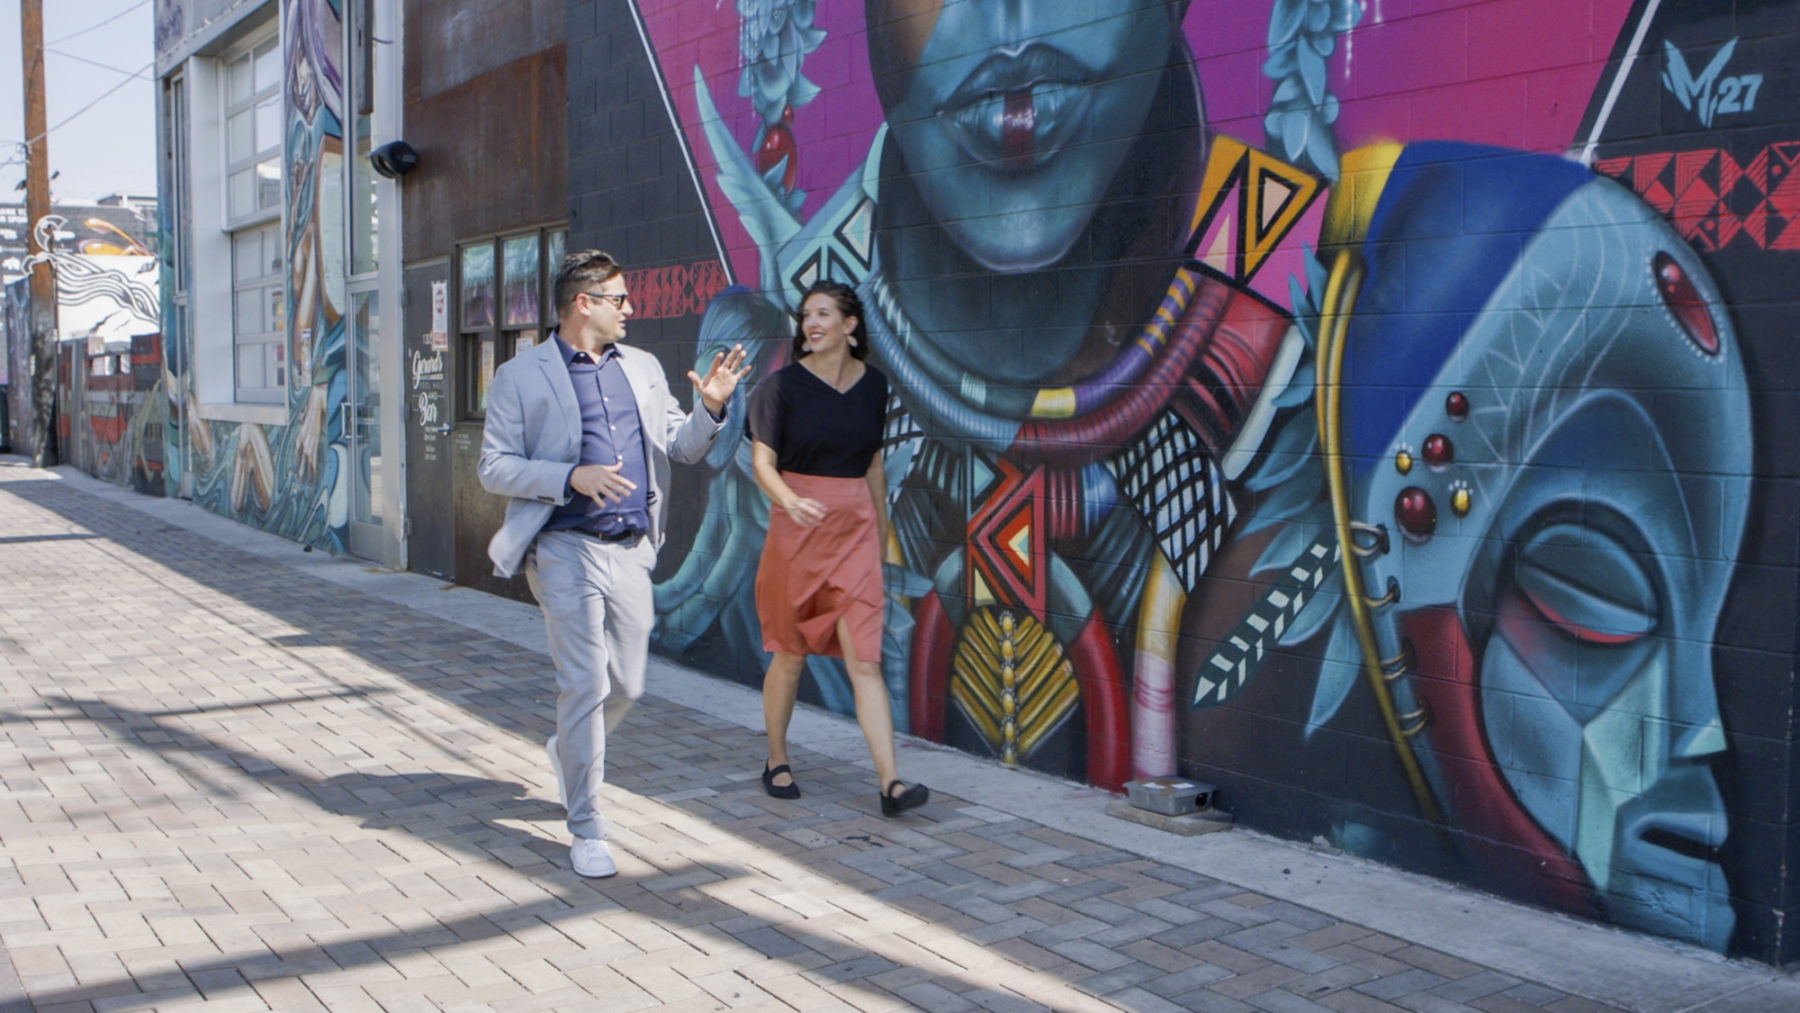 two people walk down a street in front of large art murals